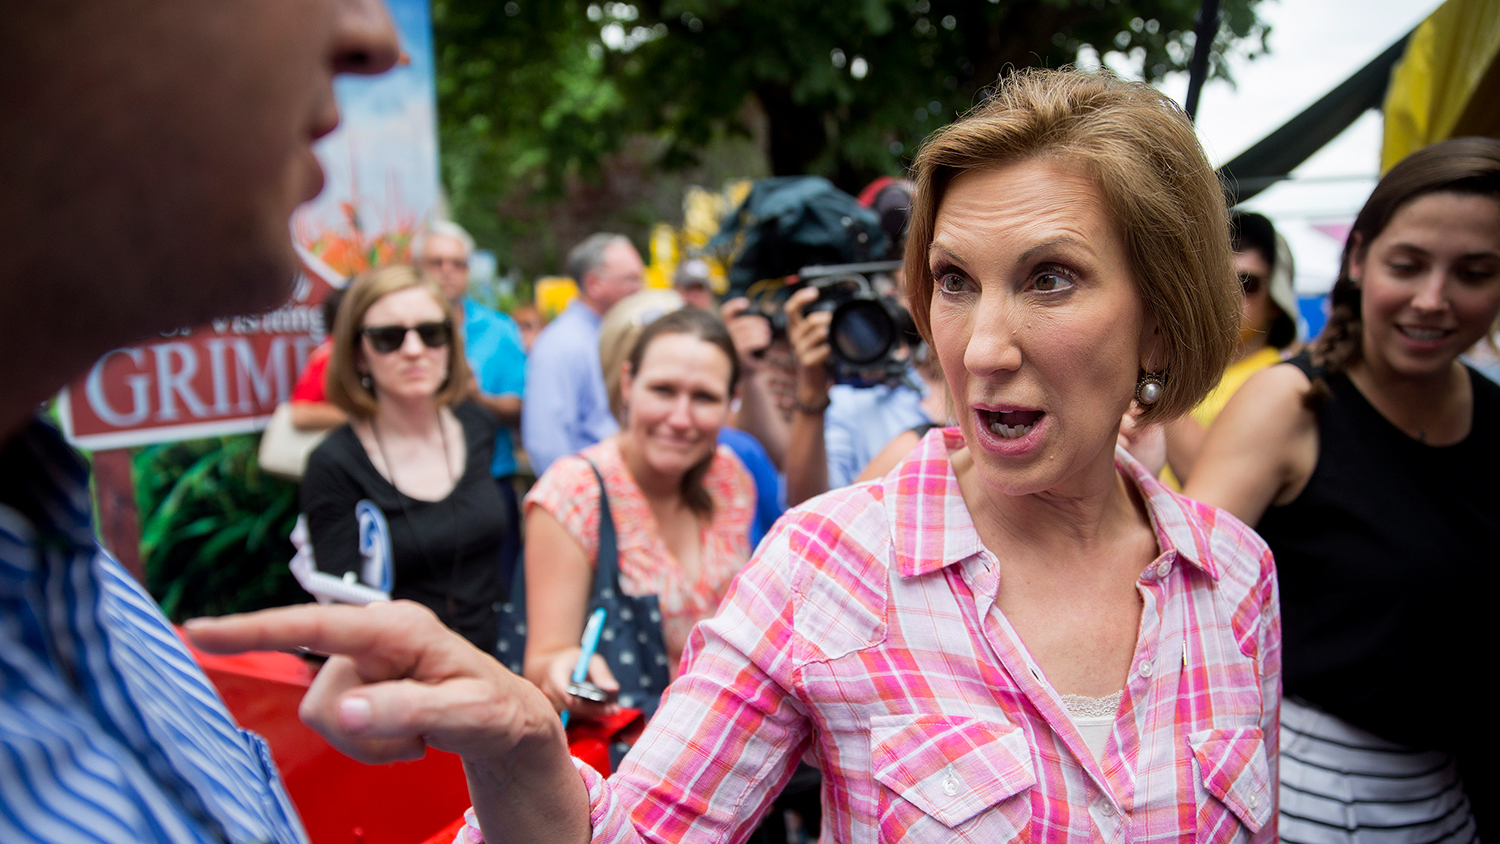 Carly Fiorina, former chairman and chief executive officer of Hewlett-Packard Co. and 2016 Republican presidential candidate, speaks with an attendee while touring the Iowa State Fair in Des Moines, Iowa, U.S., on Monday, Aug. 17, 2015.
